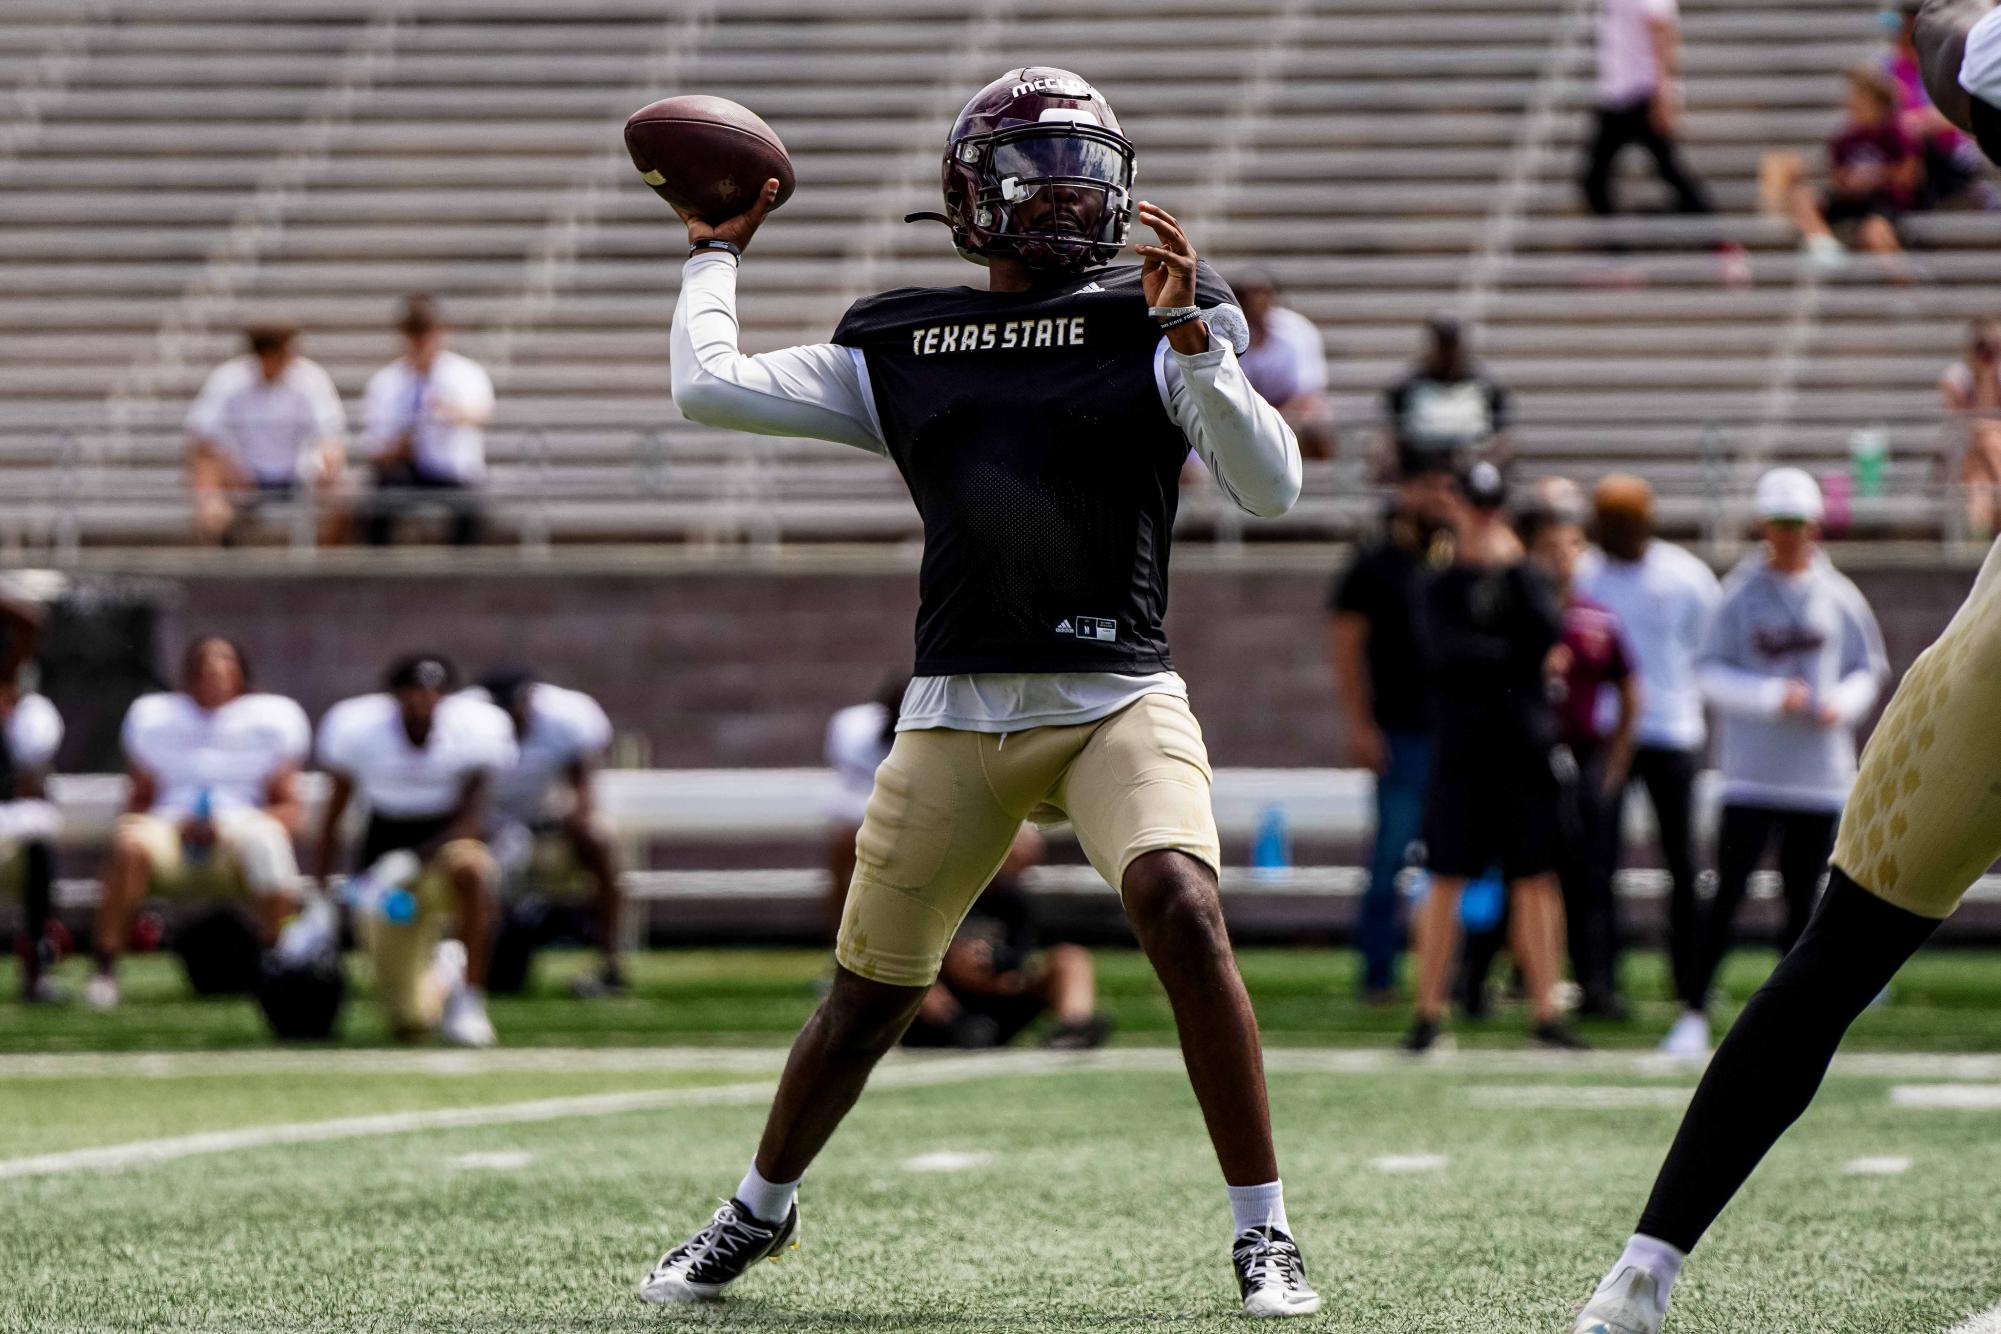 Jordan McCloud finds comfort and profit in first NIL deal with Texas State